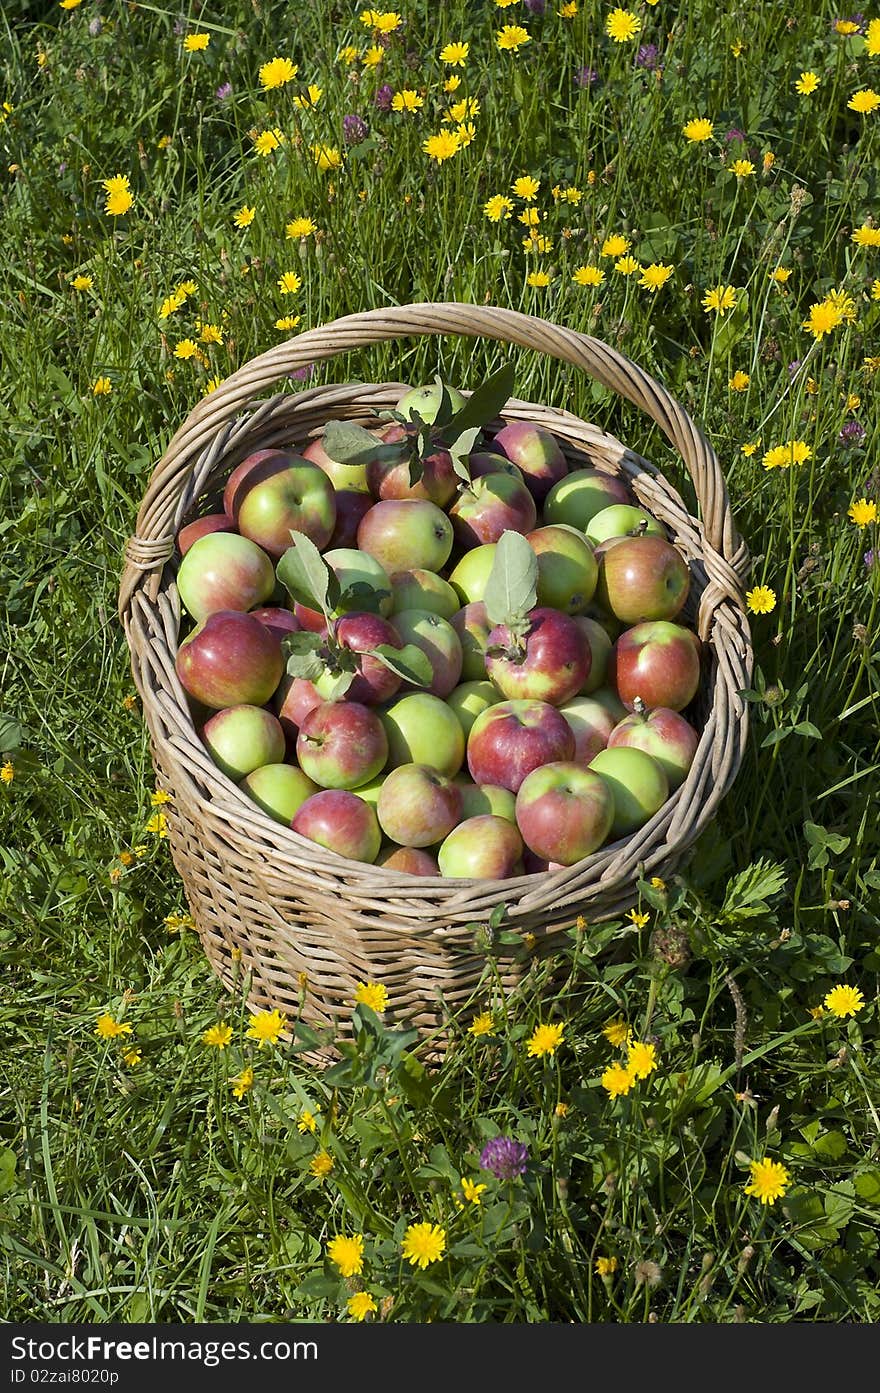 Ripe, juicy apples in an old-fashioned basket against a green grass. Ripe, juicy apples in an old-fashioned basket against a green grass